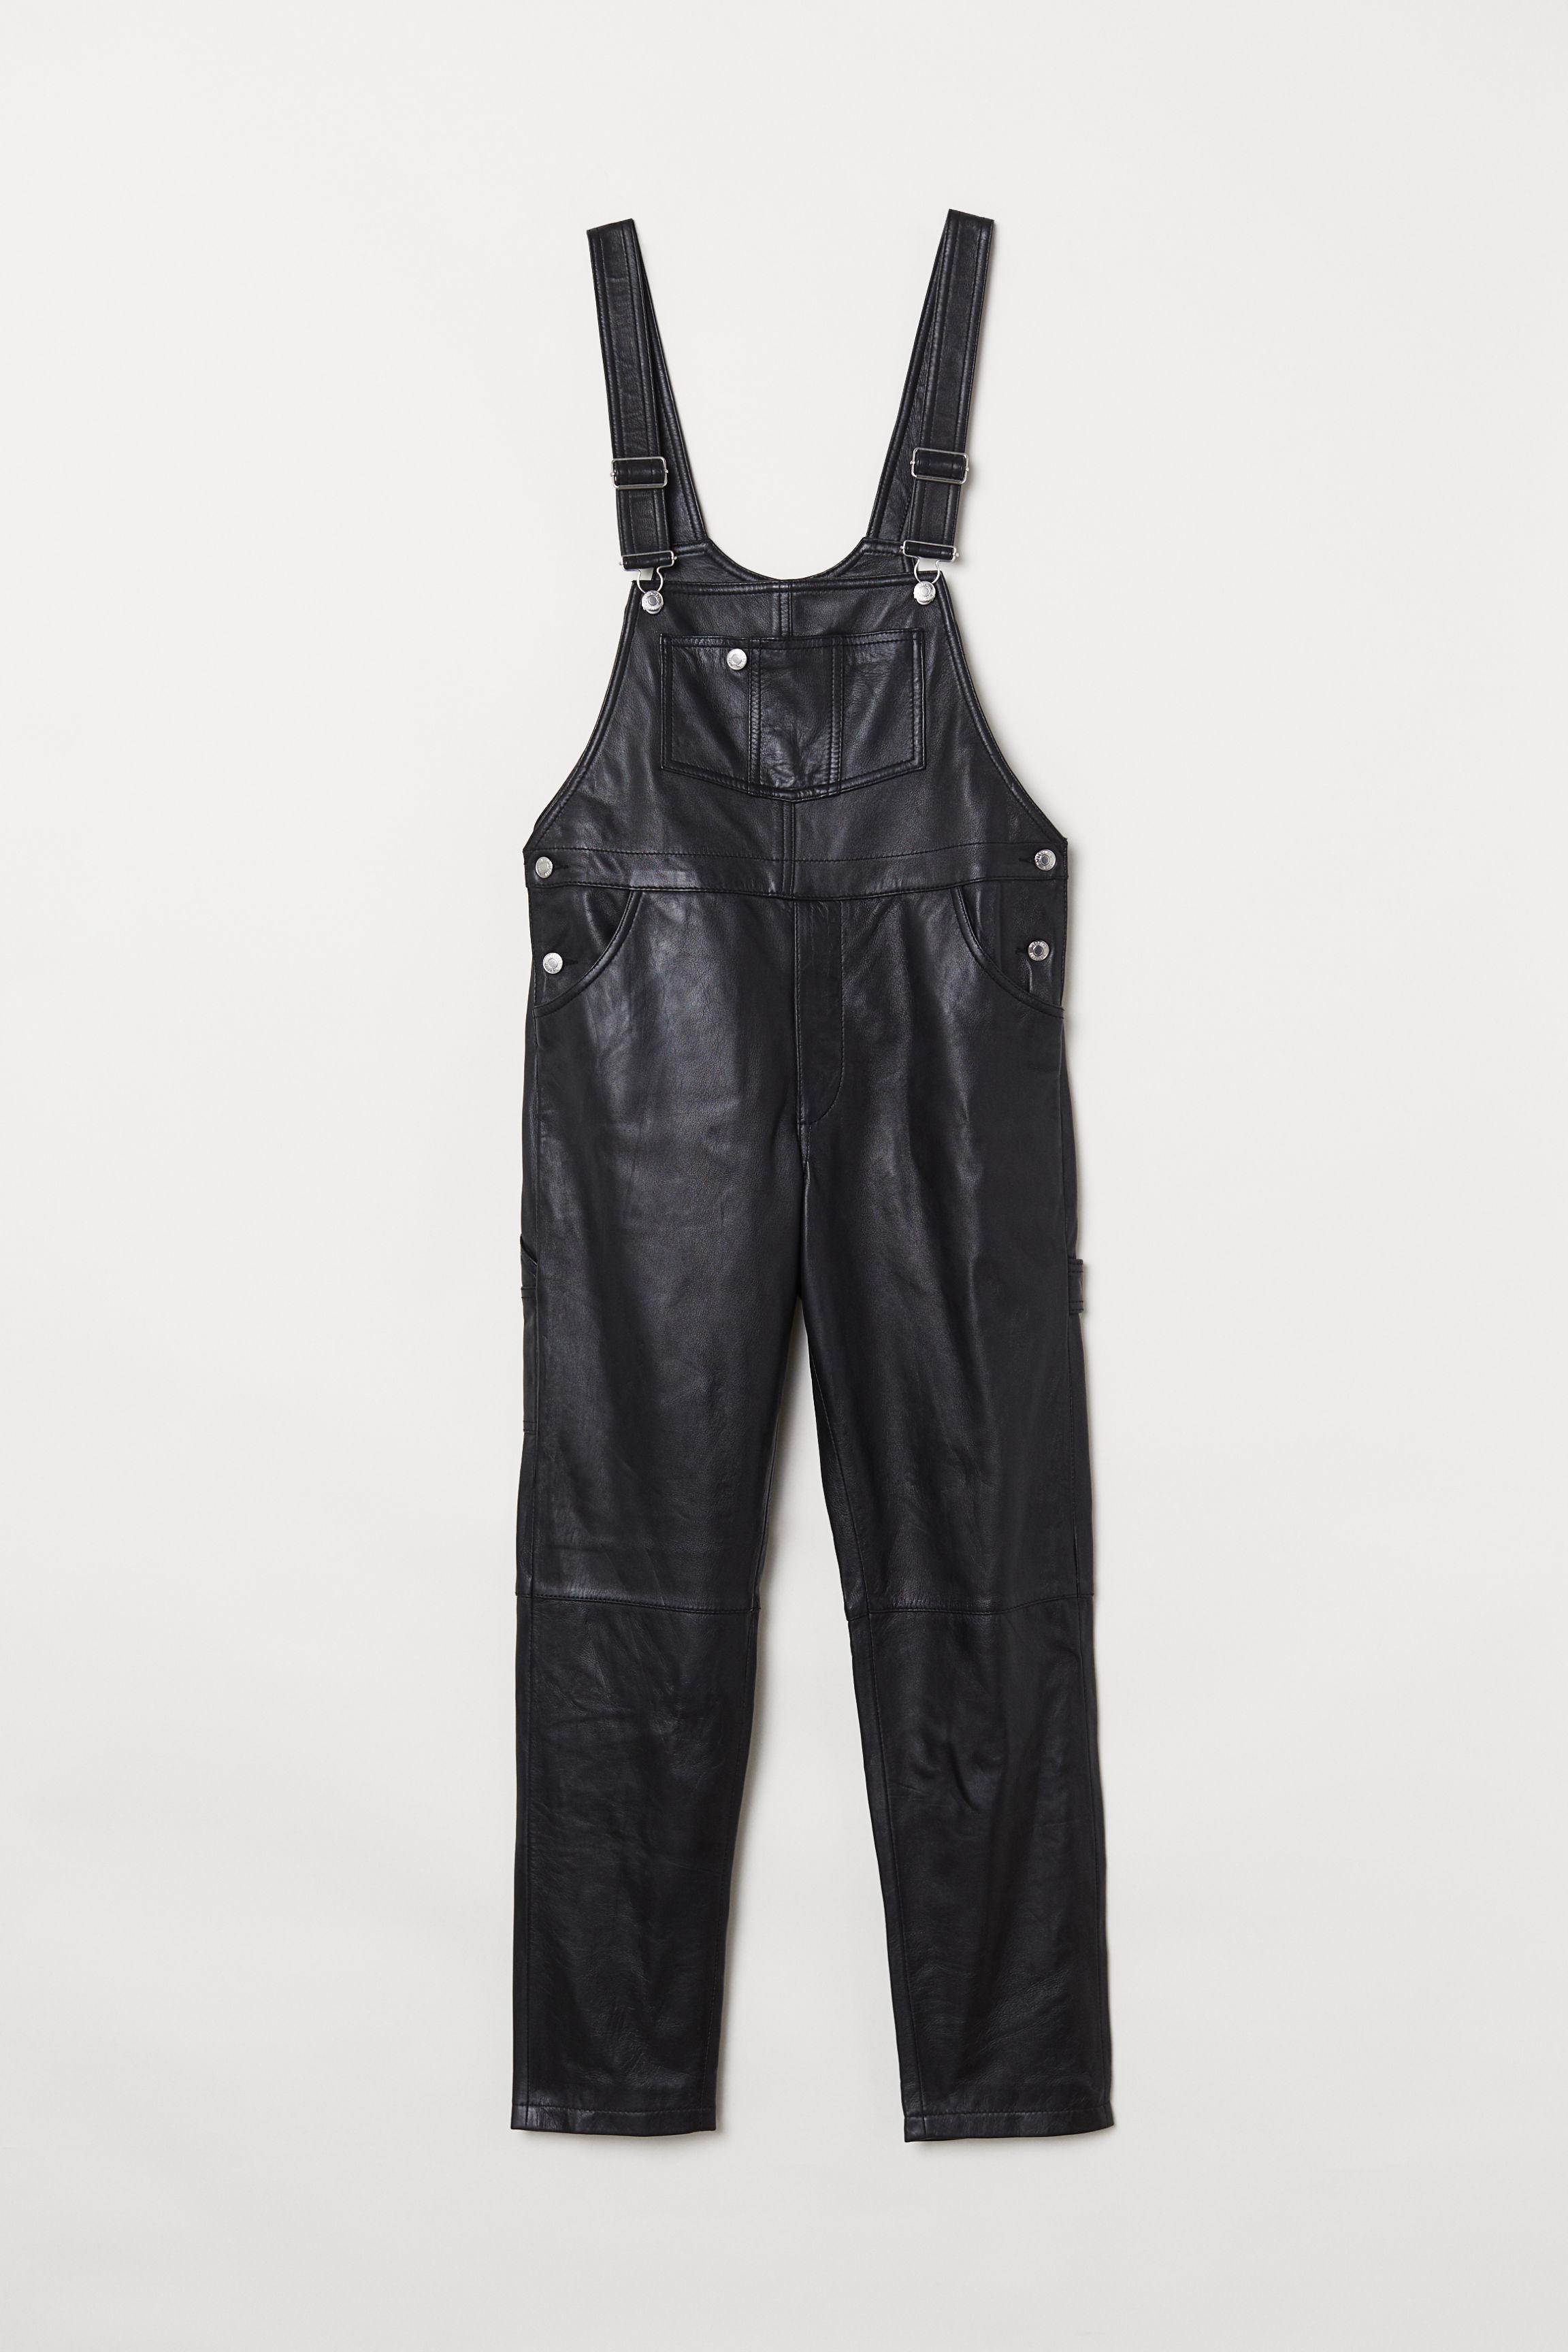 H&M Leather Bib Overalls in Black for Men | Lyst